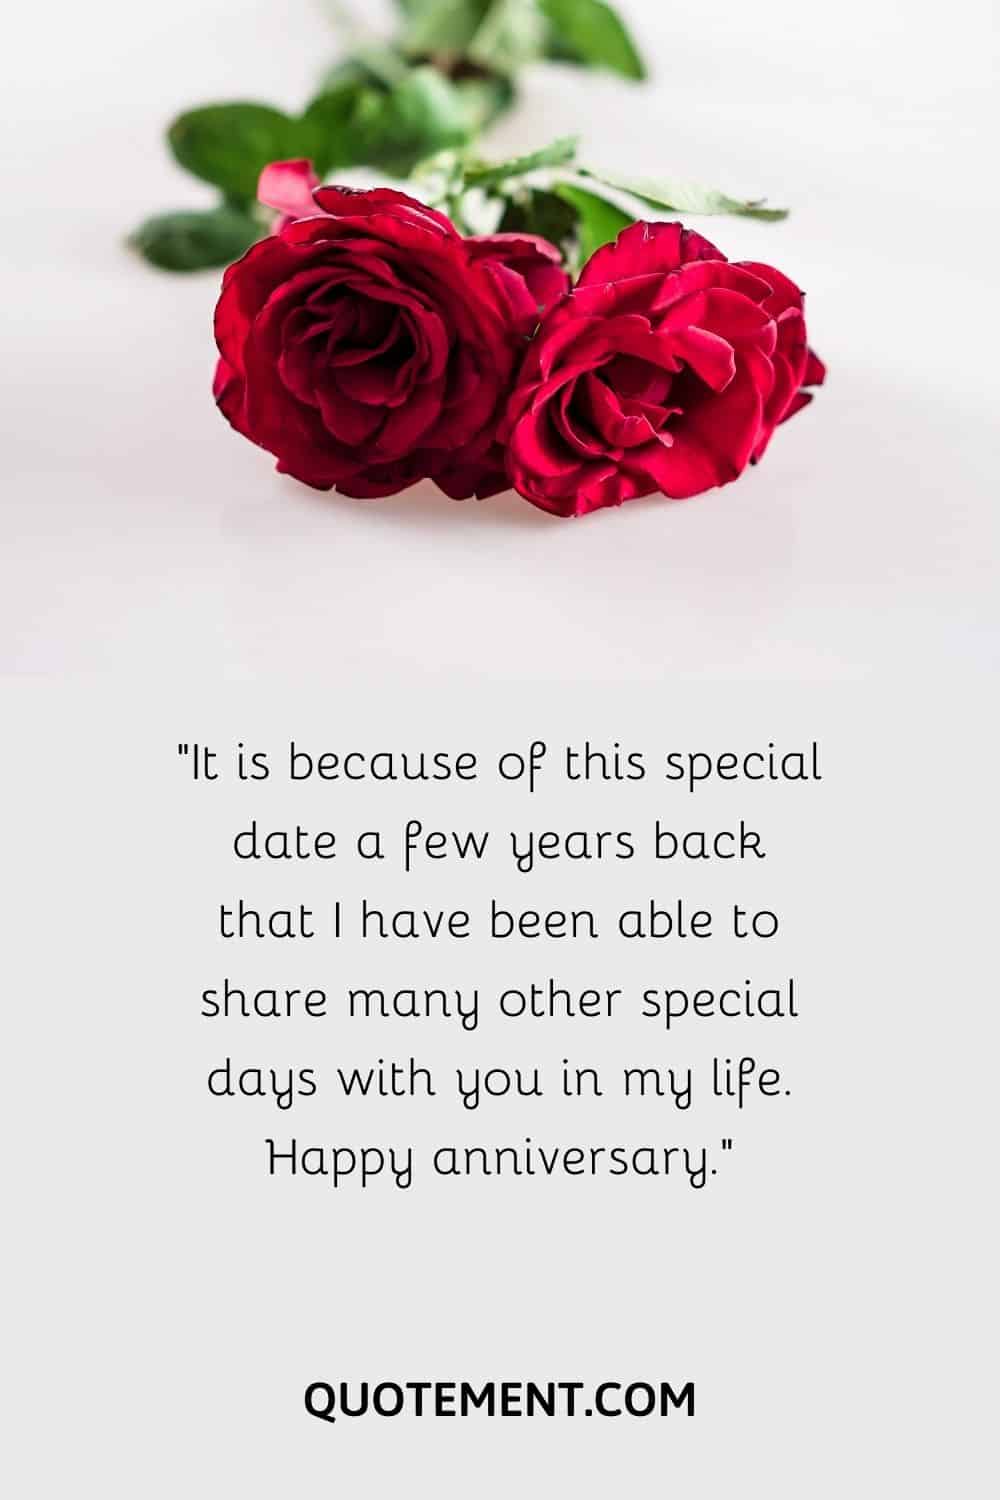 It is because of this special date a few years back that I have been able to share many other special days with you in my life. Happy anniversary.